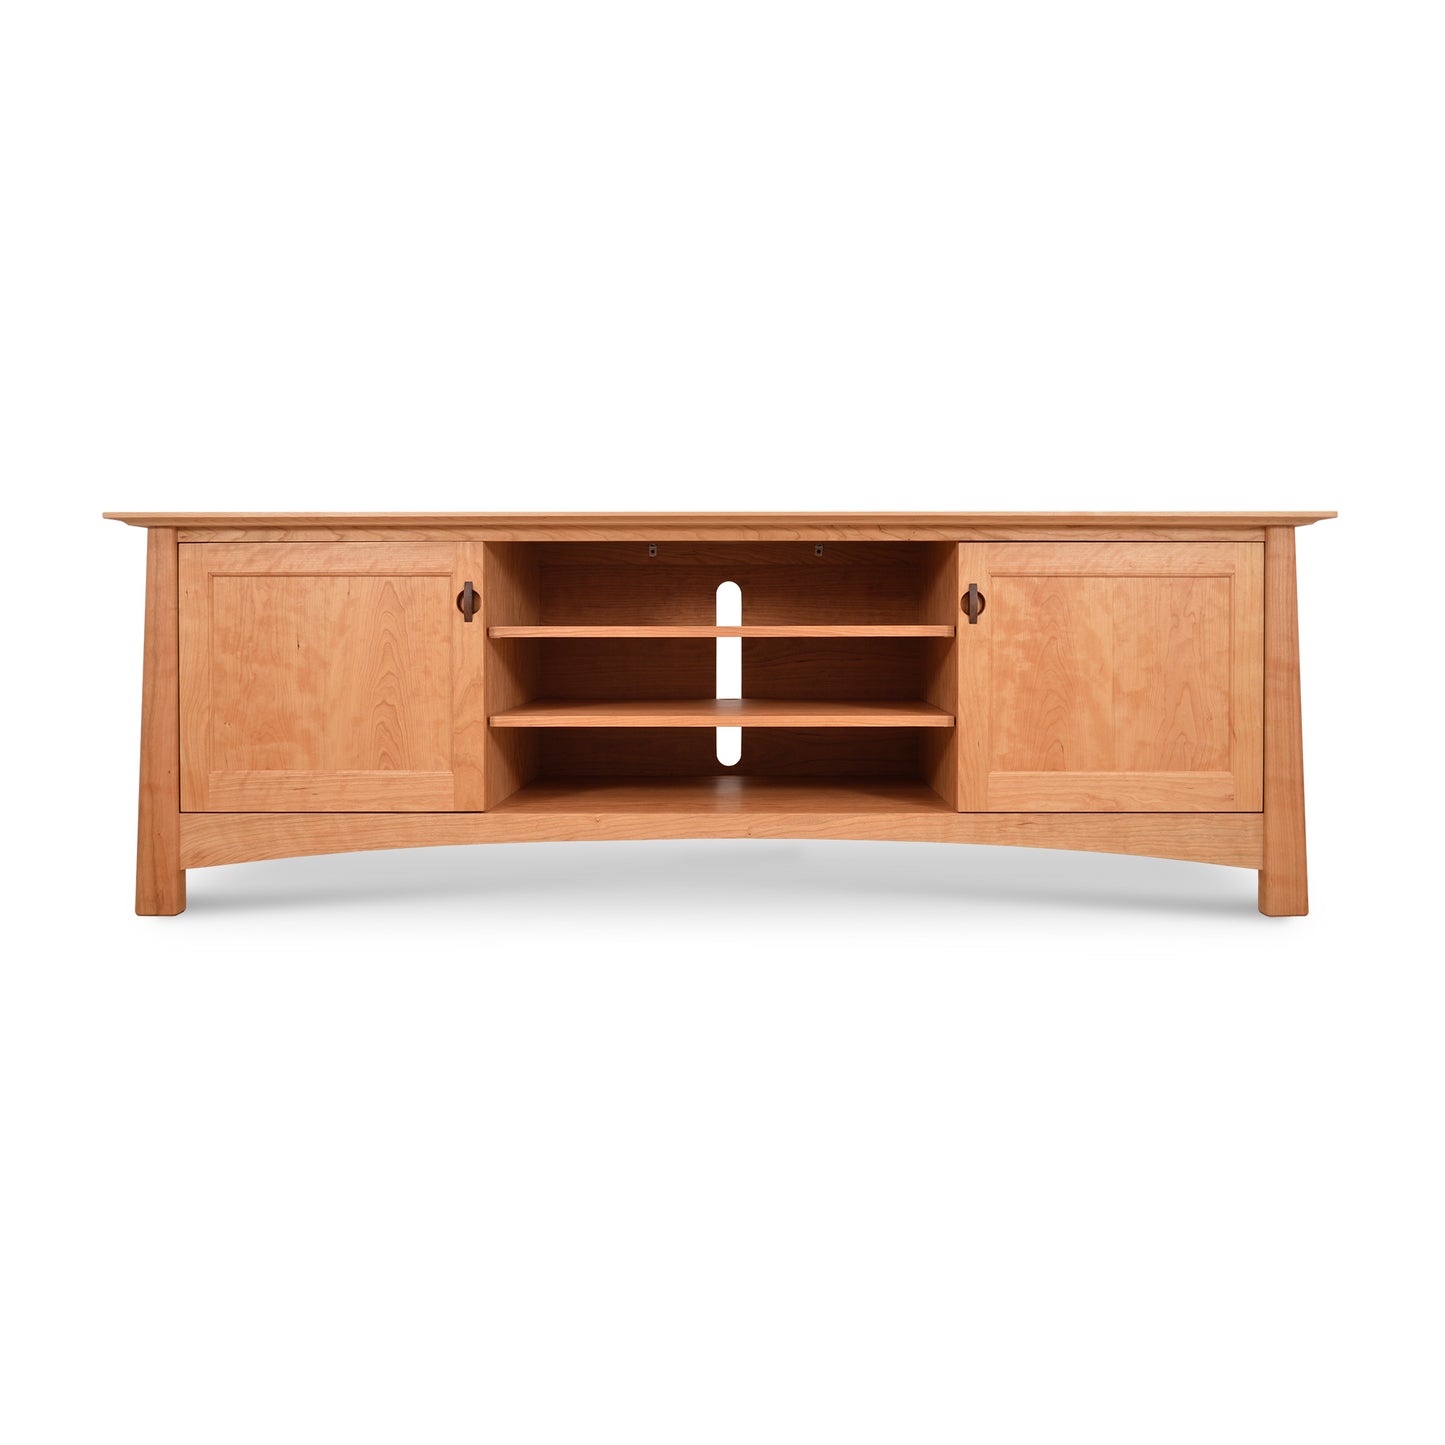 A long wooden Maple Corner Woodworks Cherry Moon 80" TV-Media Console with a natural finish, featuring two closed side cabinets and open shelving in the center, isolated on a white background.